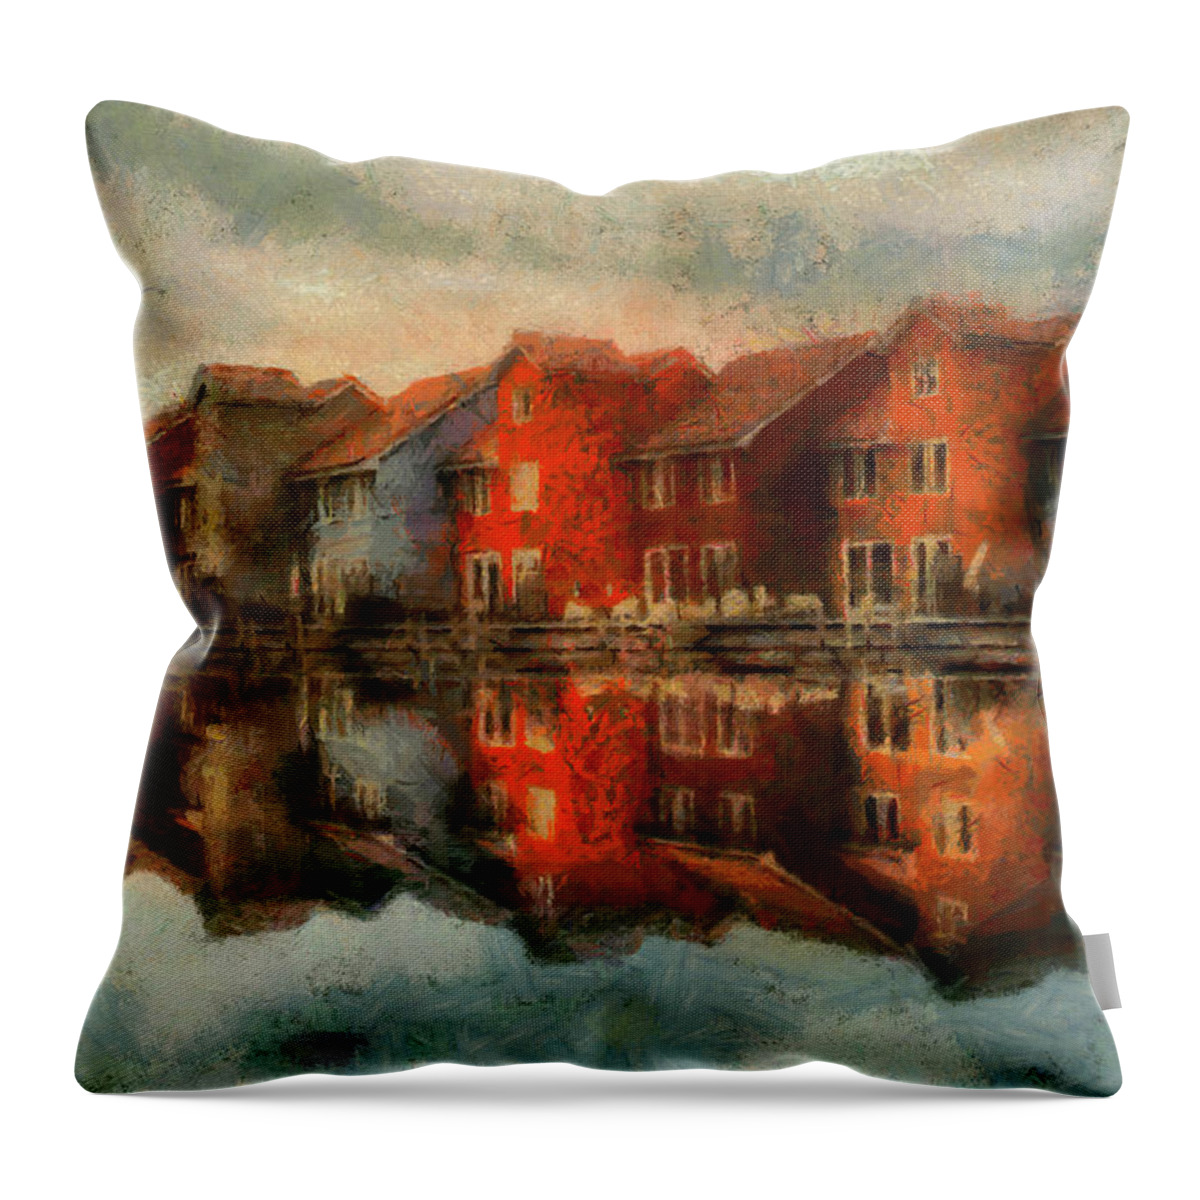 Landscape Throw Pillow featuring the painting Houses by the Sea by Kai Saarto